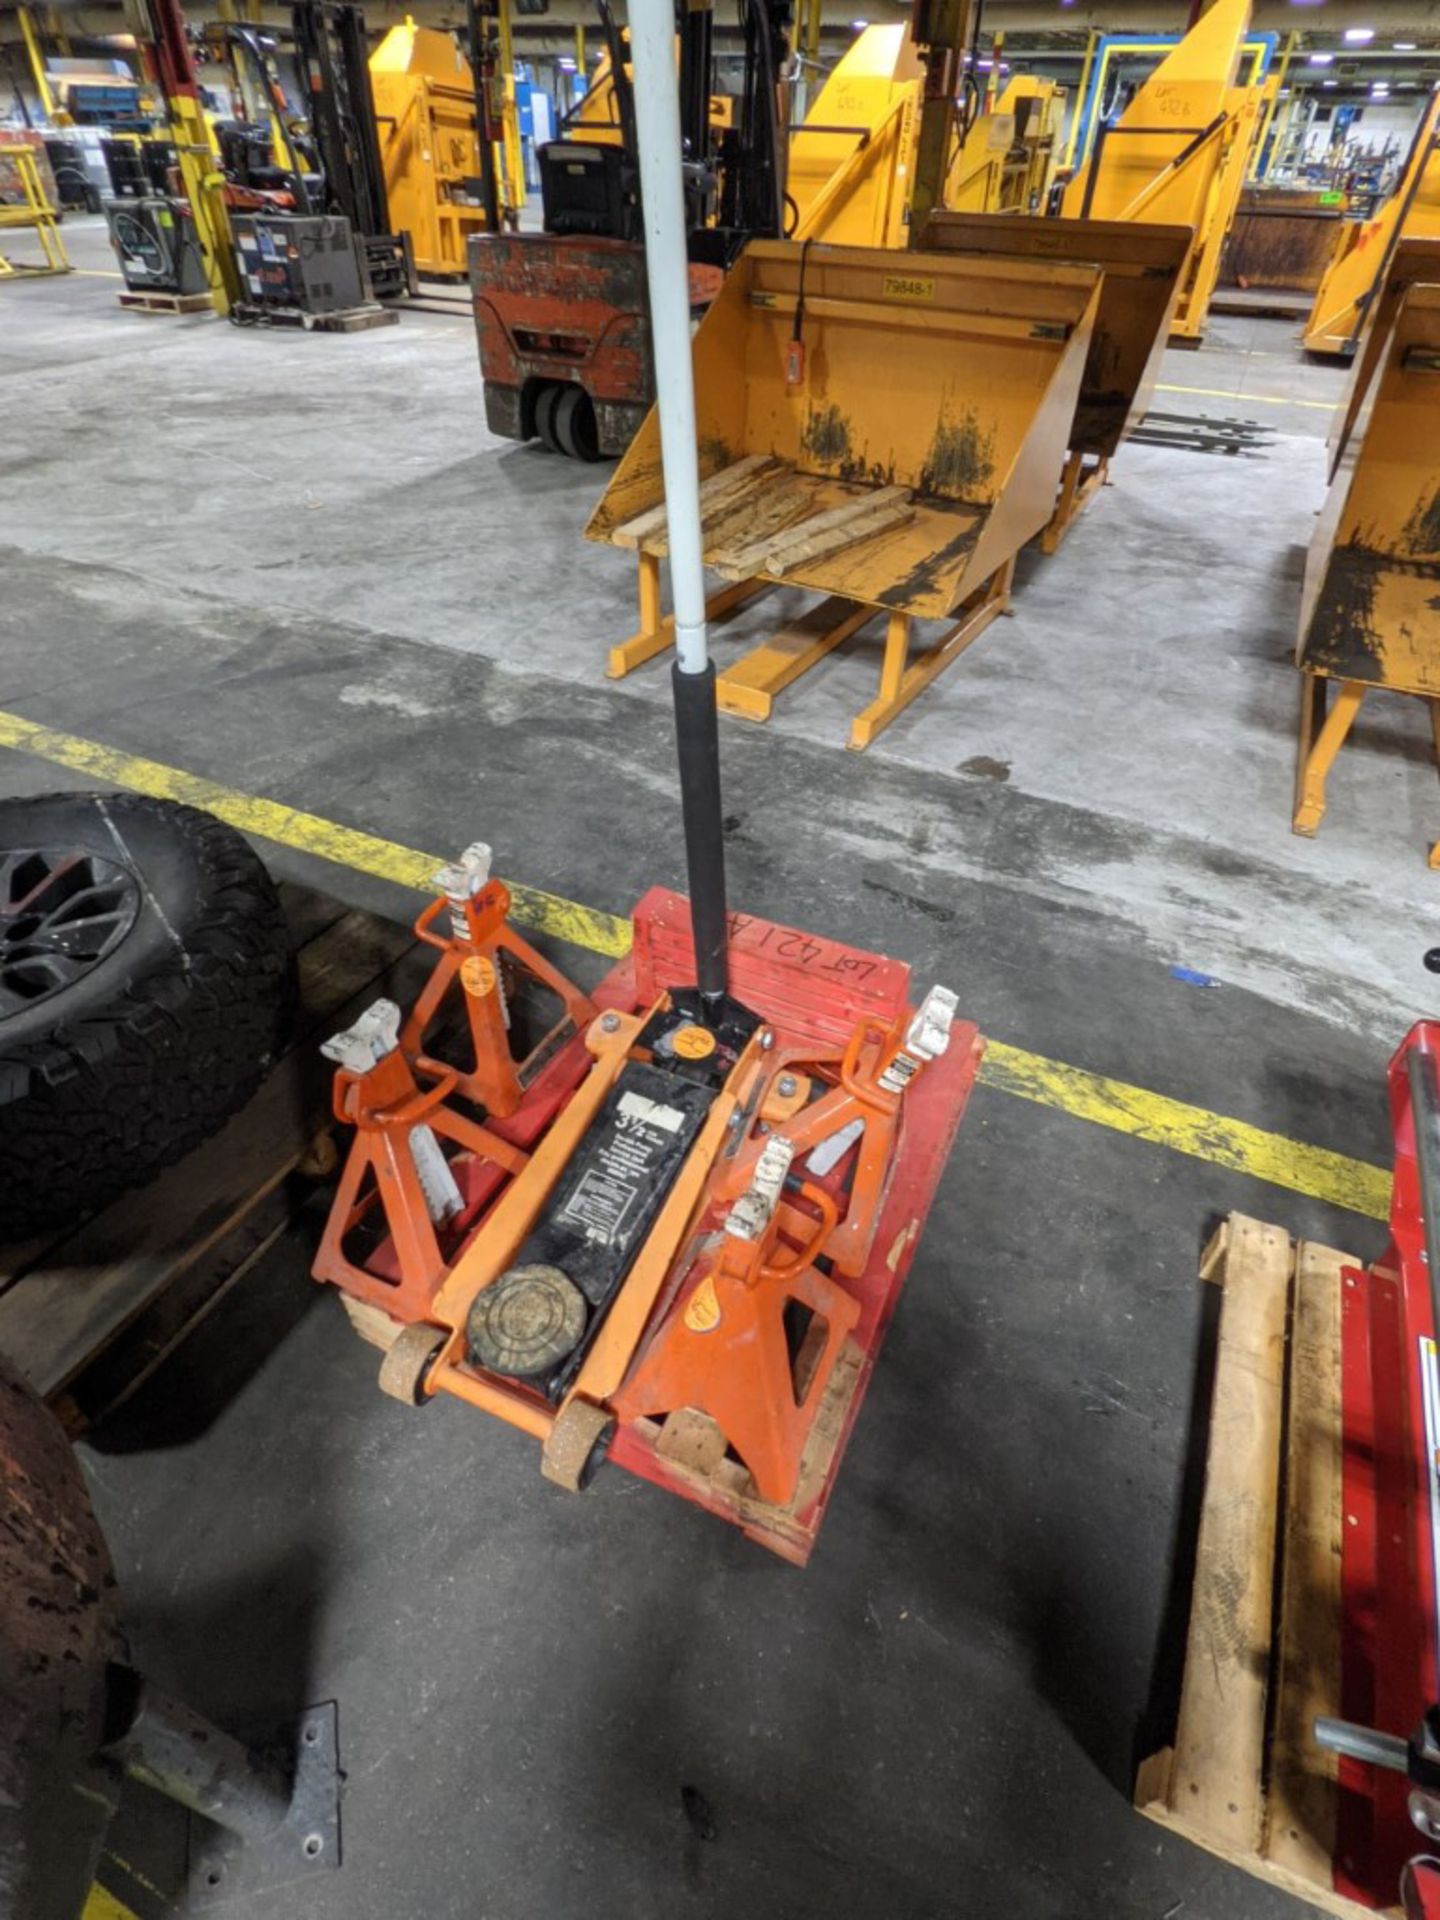 LOT/ 3.5 TON FLOOR JACK WITH STANDS [RIGGING FEE FOR LOT #421 A - $25 USD PLUS APPLICABLE TAXES] - Image 2 of 2